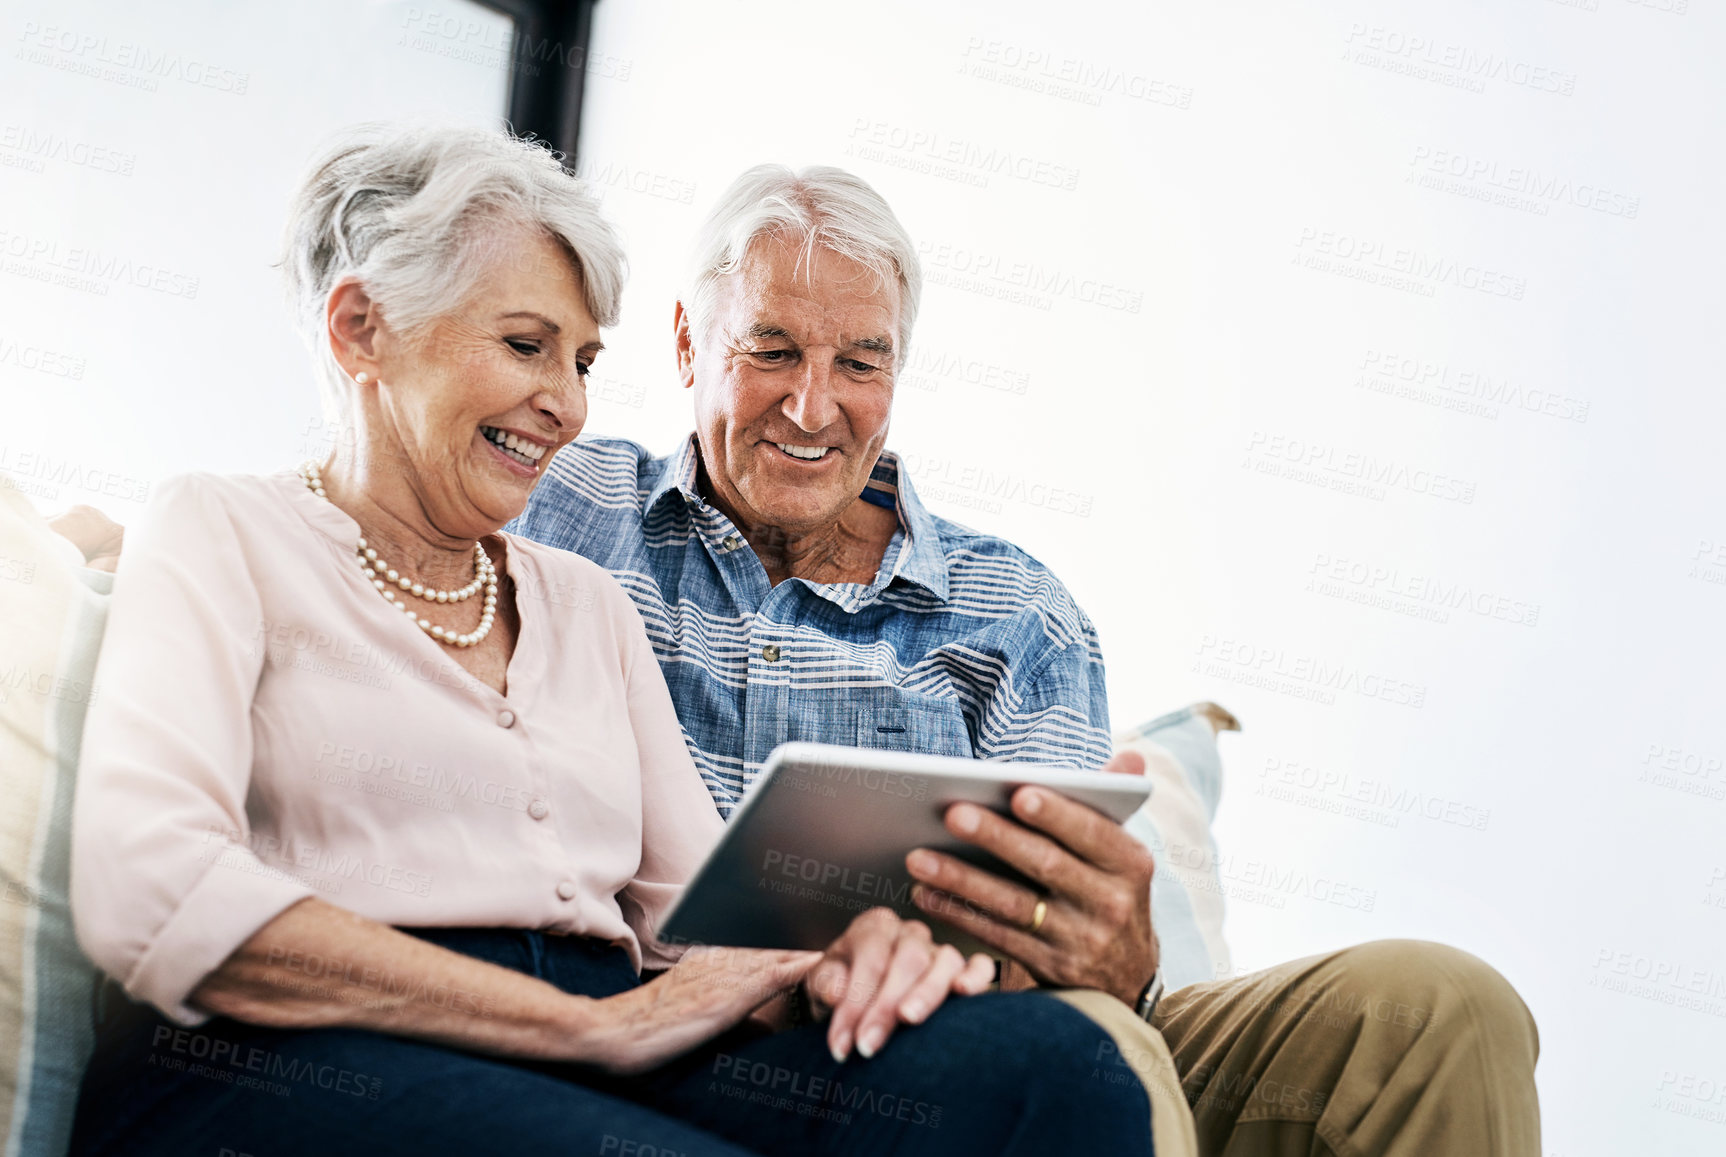 Buy stock photo Shot of a senior couple relaxing on the sofa and using a digital tablet together at home